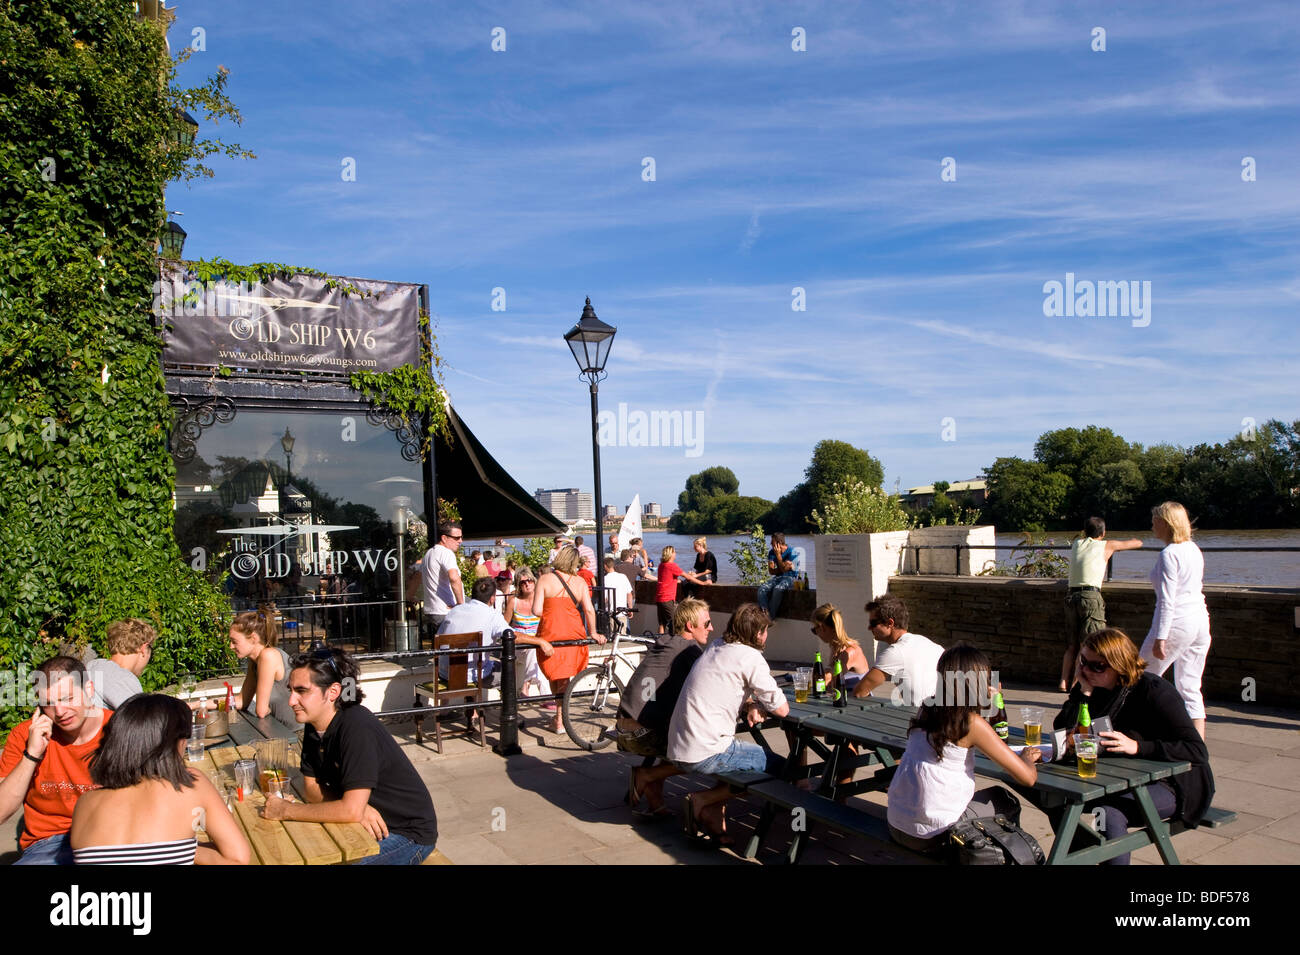 People relax in pub The Old Ship overlooking Thames river, Hammersmith, W6, London, United Kingdom Stock Photo